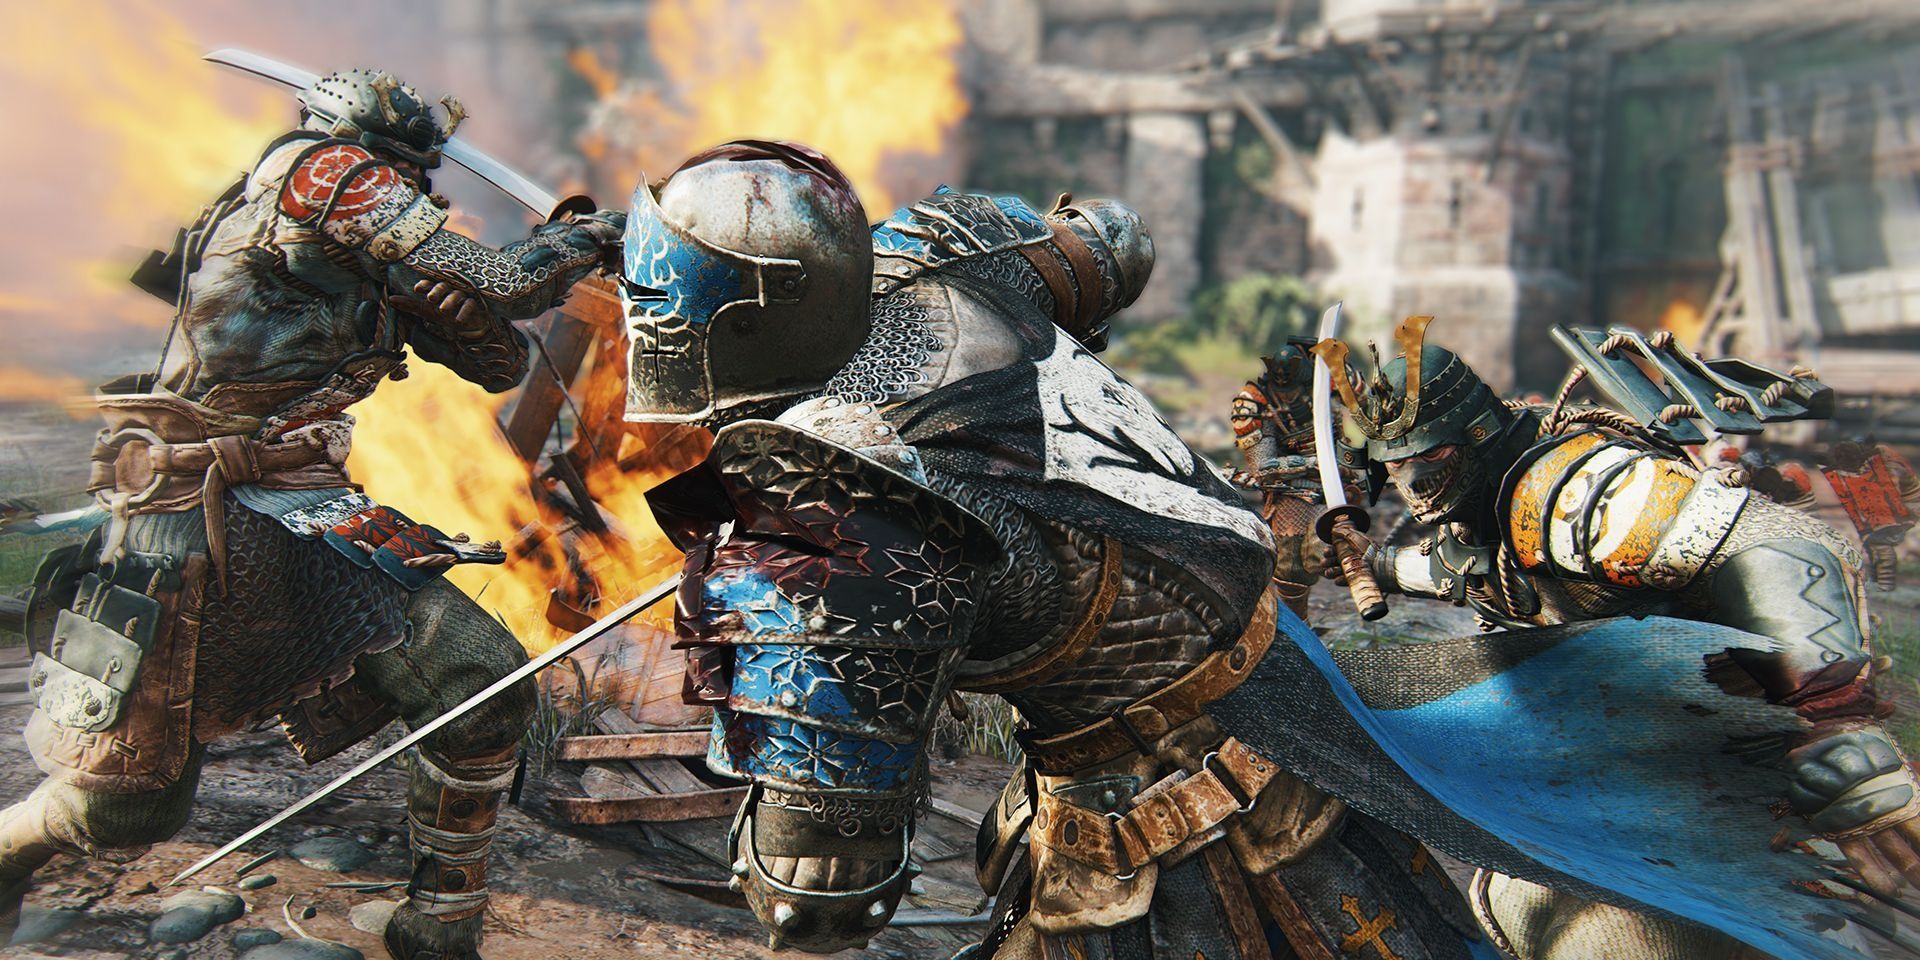 For Honor Warden out of stamina being attacked